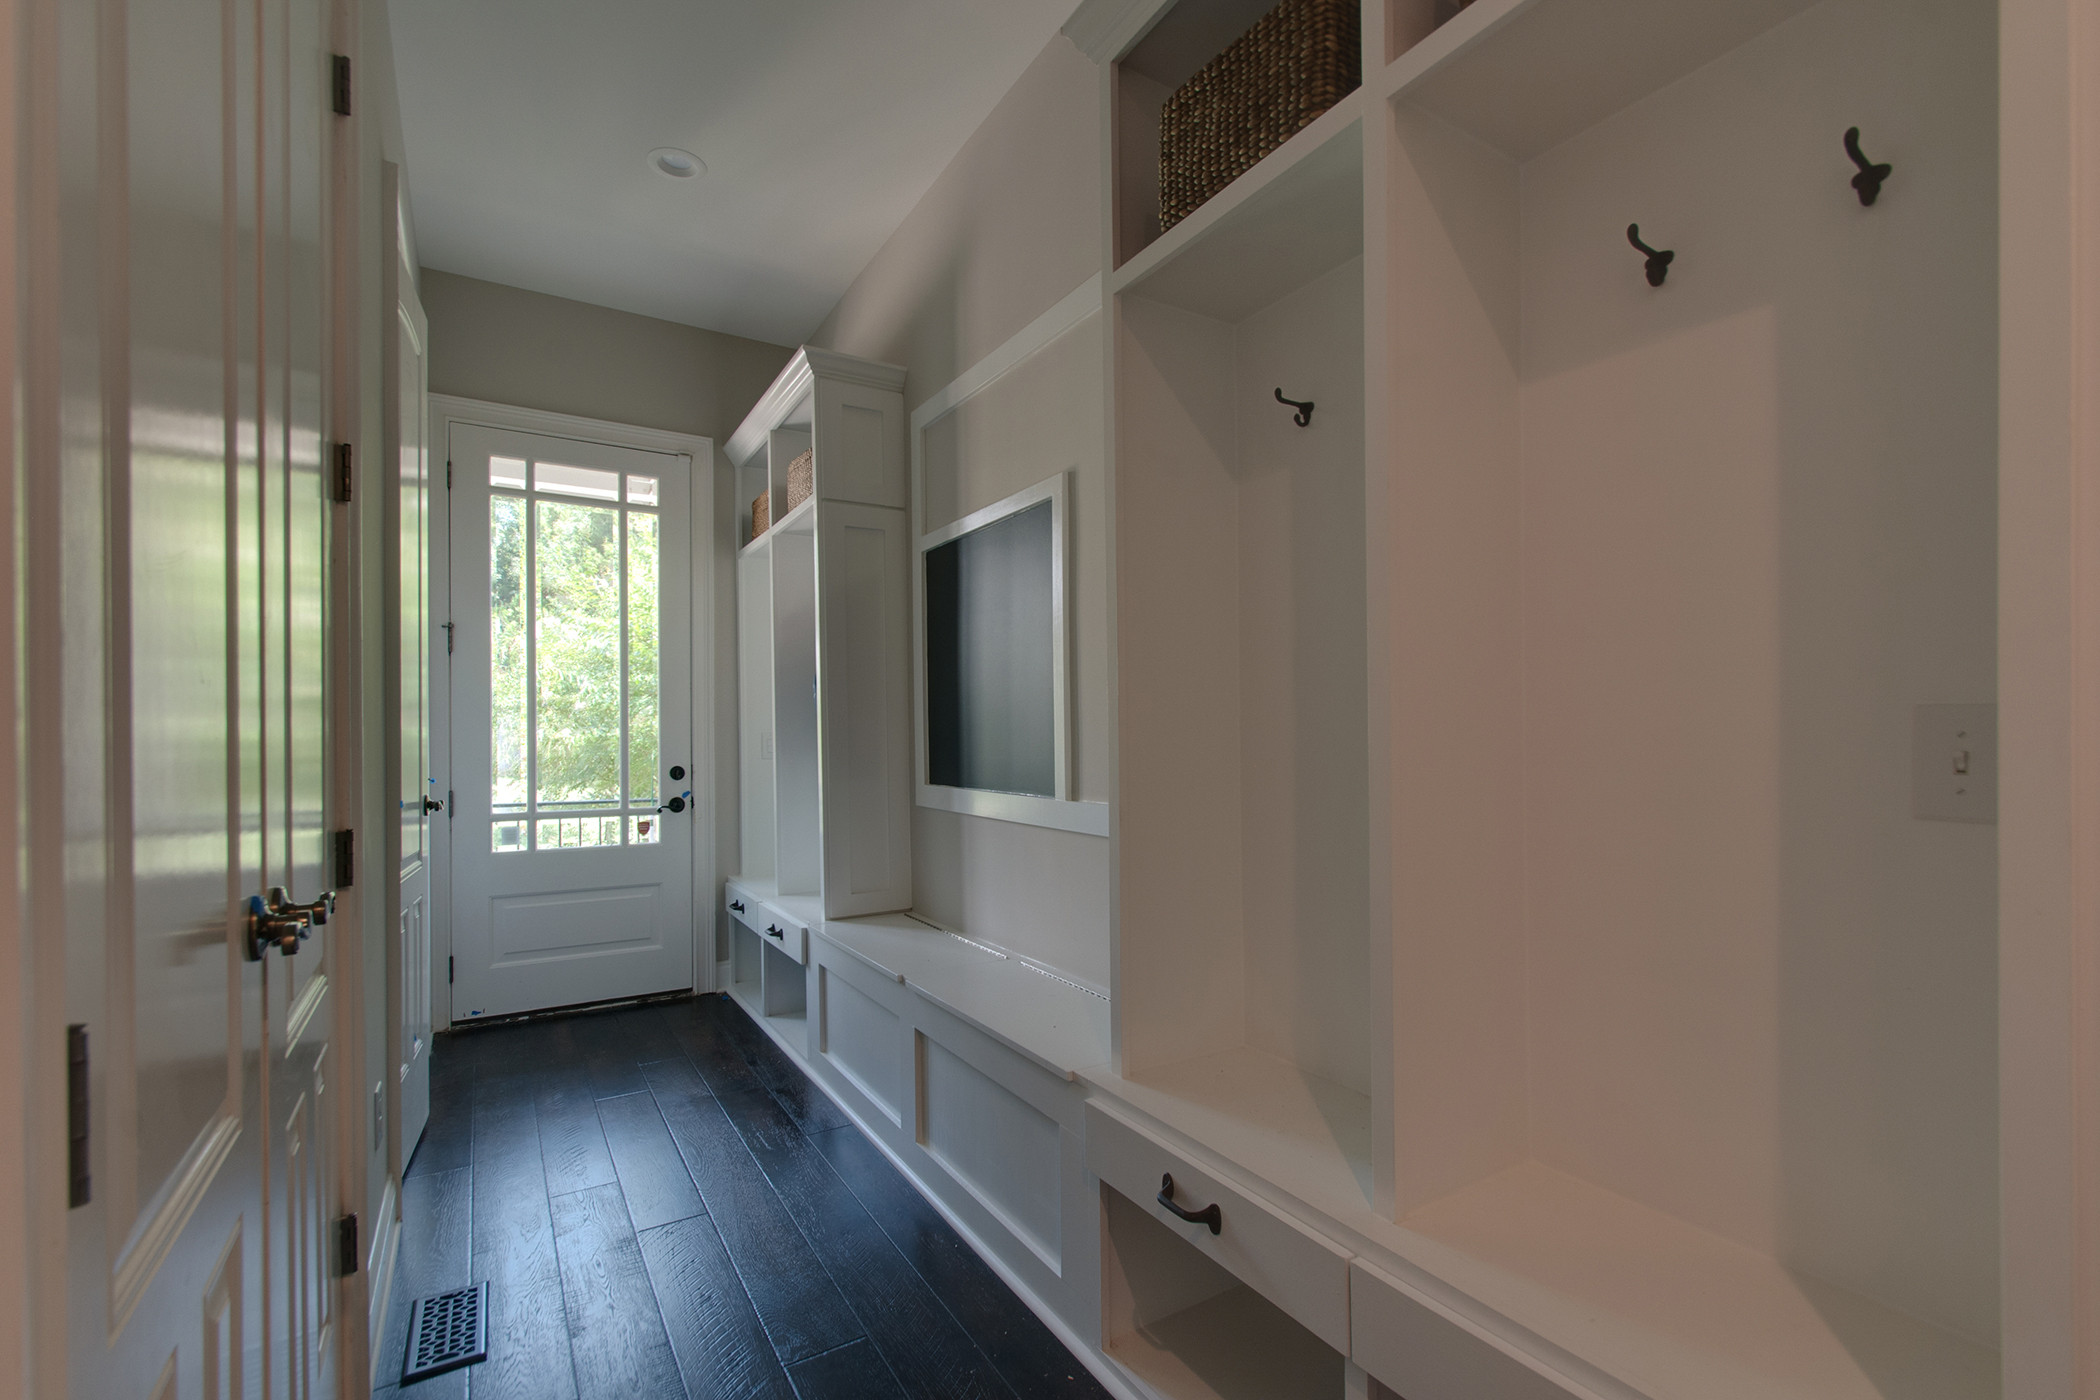 This second entry/vestibule to the home, was originally just an open hallway. By designing and incorporating  a customized cubby system for each family member, USI was able to create a space that enco